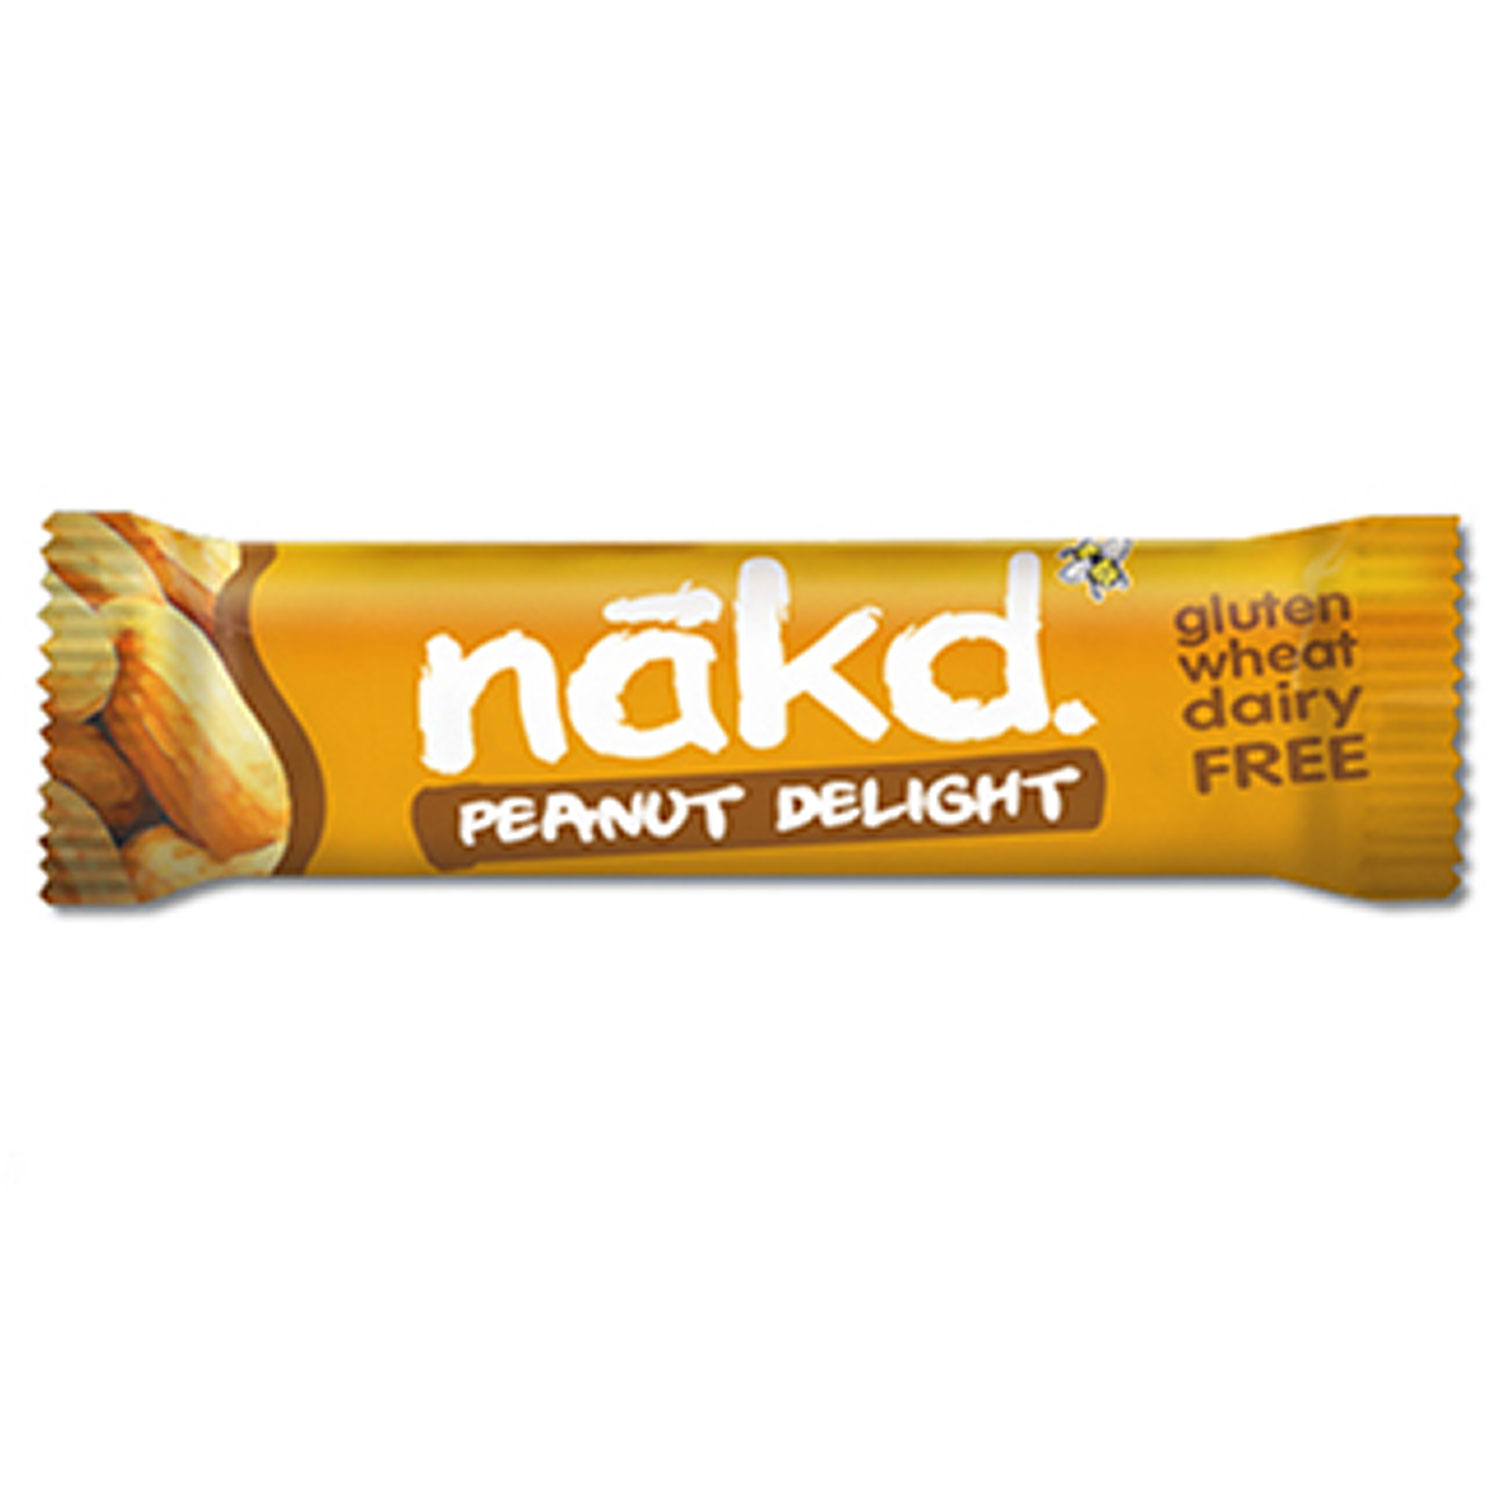 Nakd Peanut Delight Raw Fruit & Nut Bars 35g RRP 89p CLEARANCE XL 39p or 3 for 99p